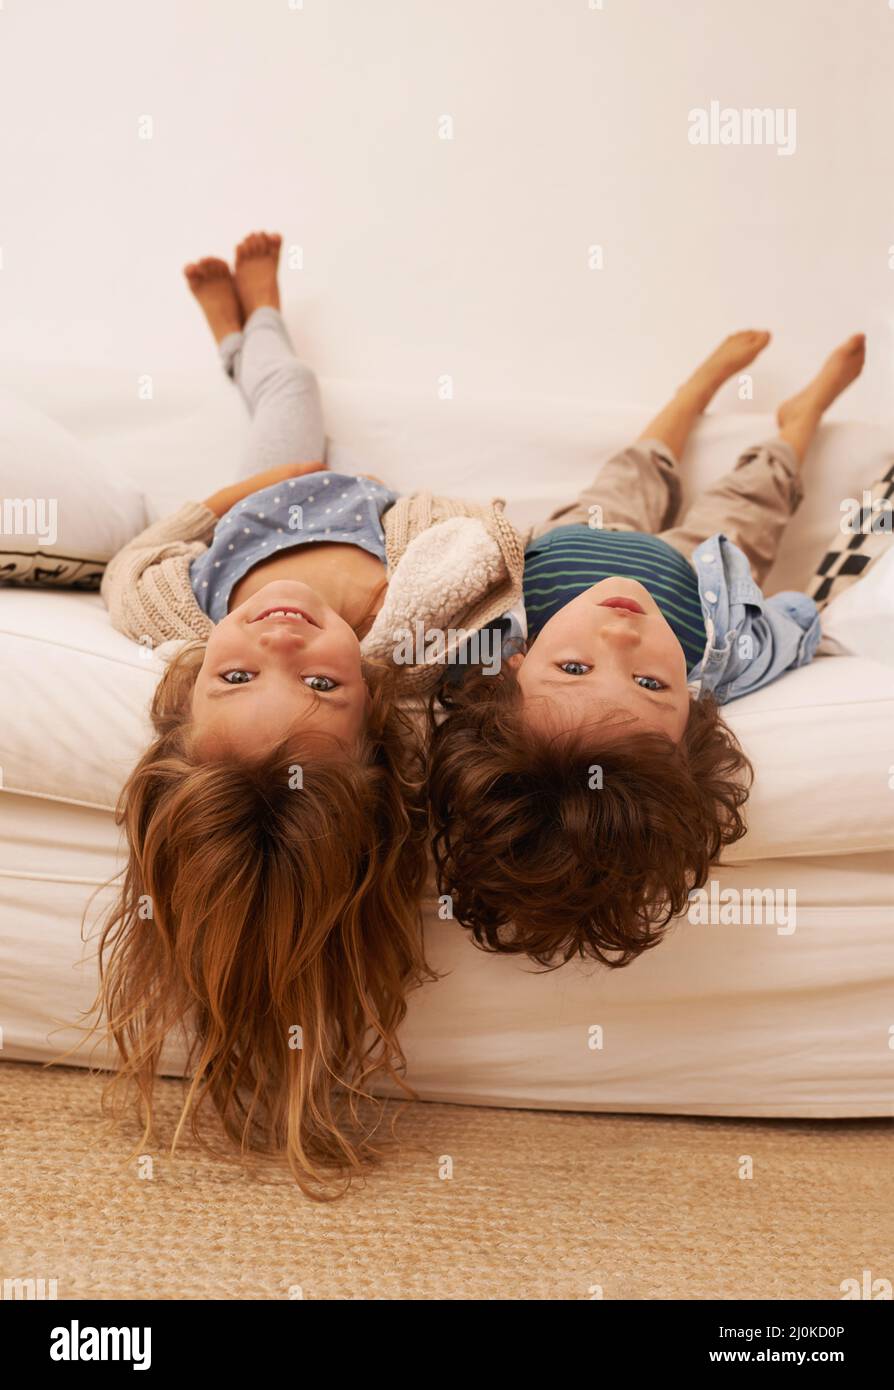 Even upside down were still bored. Portrait of two young children lying on a sofa with their heads hanging over the edge. Stock Photo